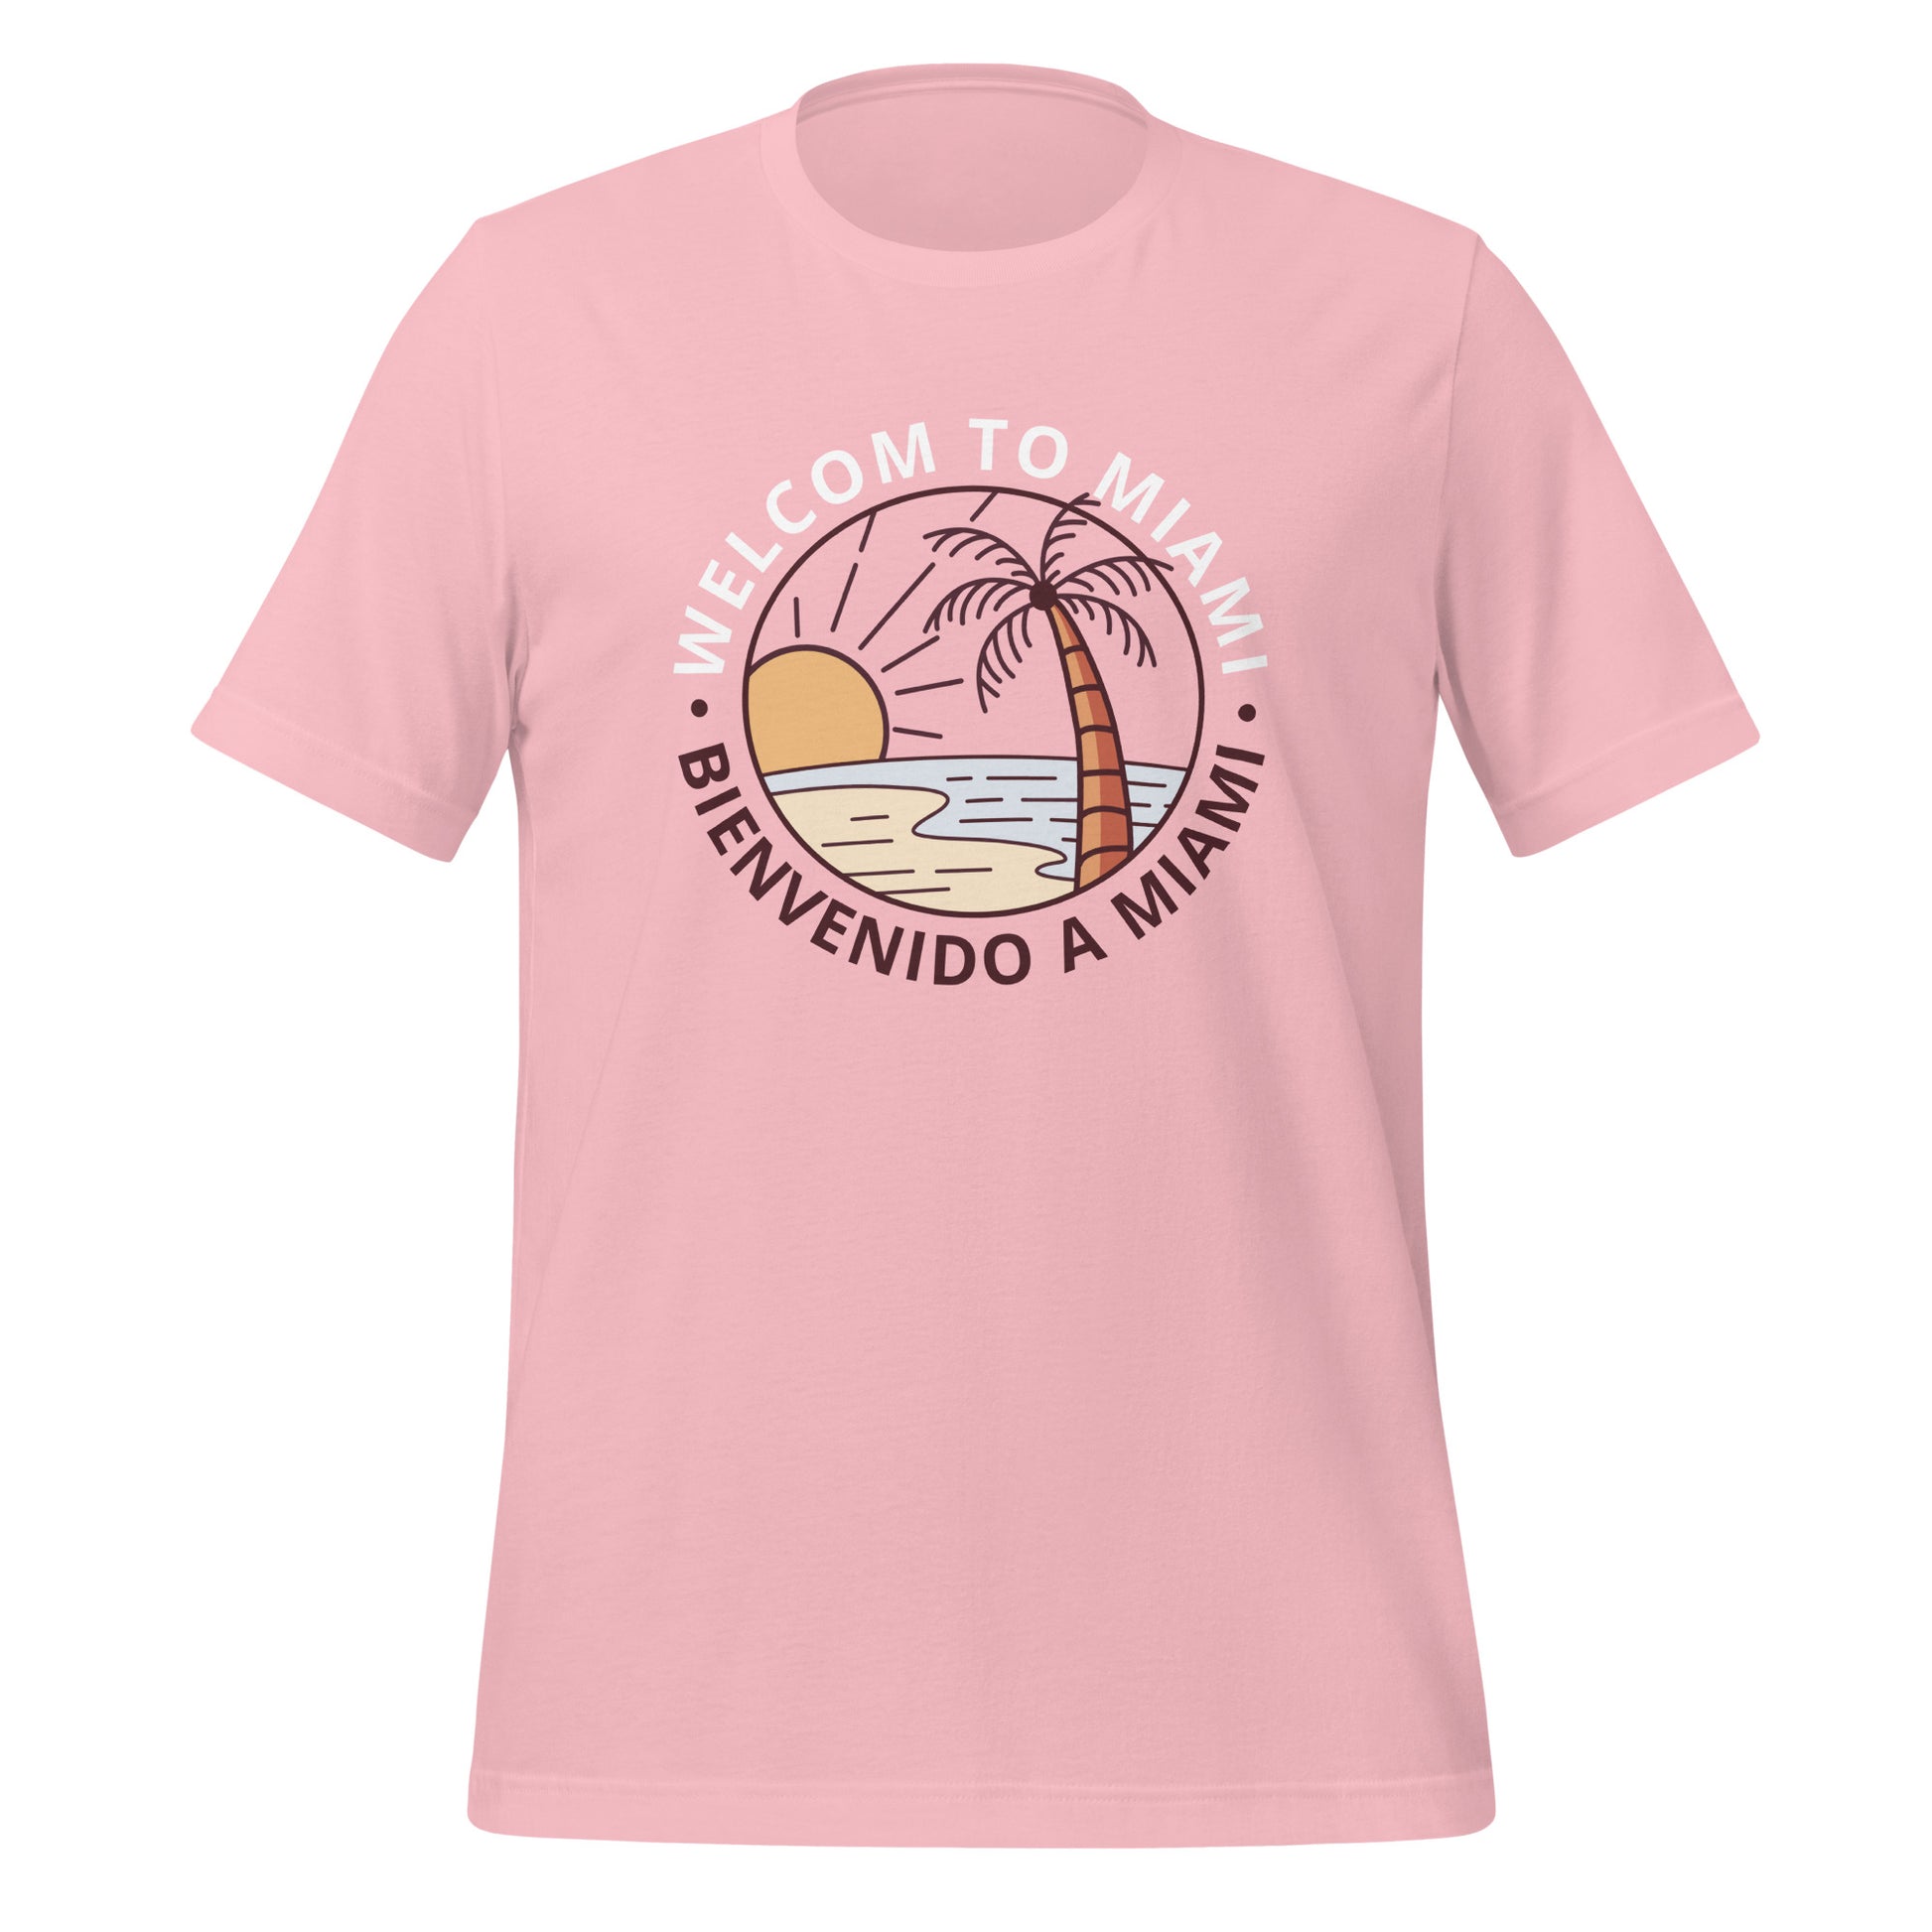 Welcome To Miami T-Shirt pink